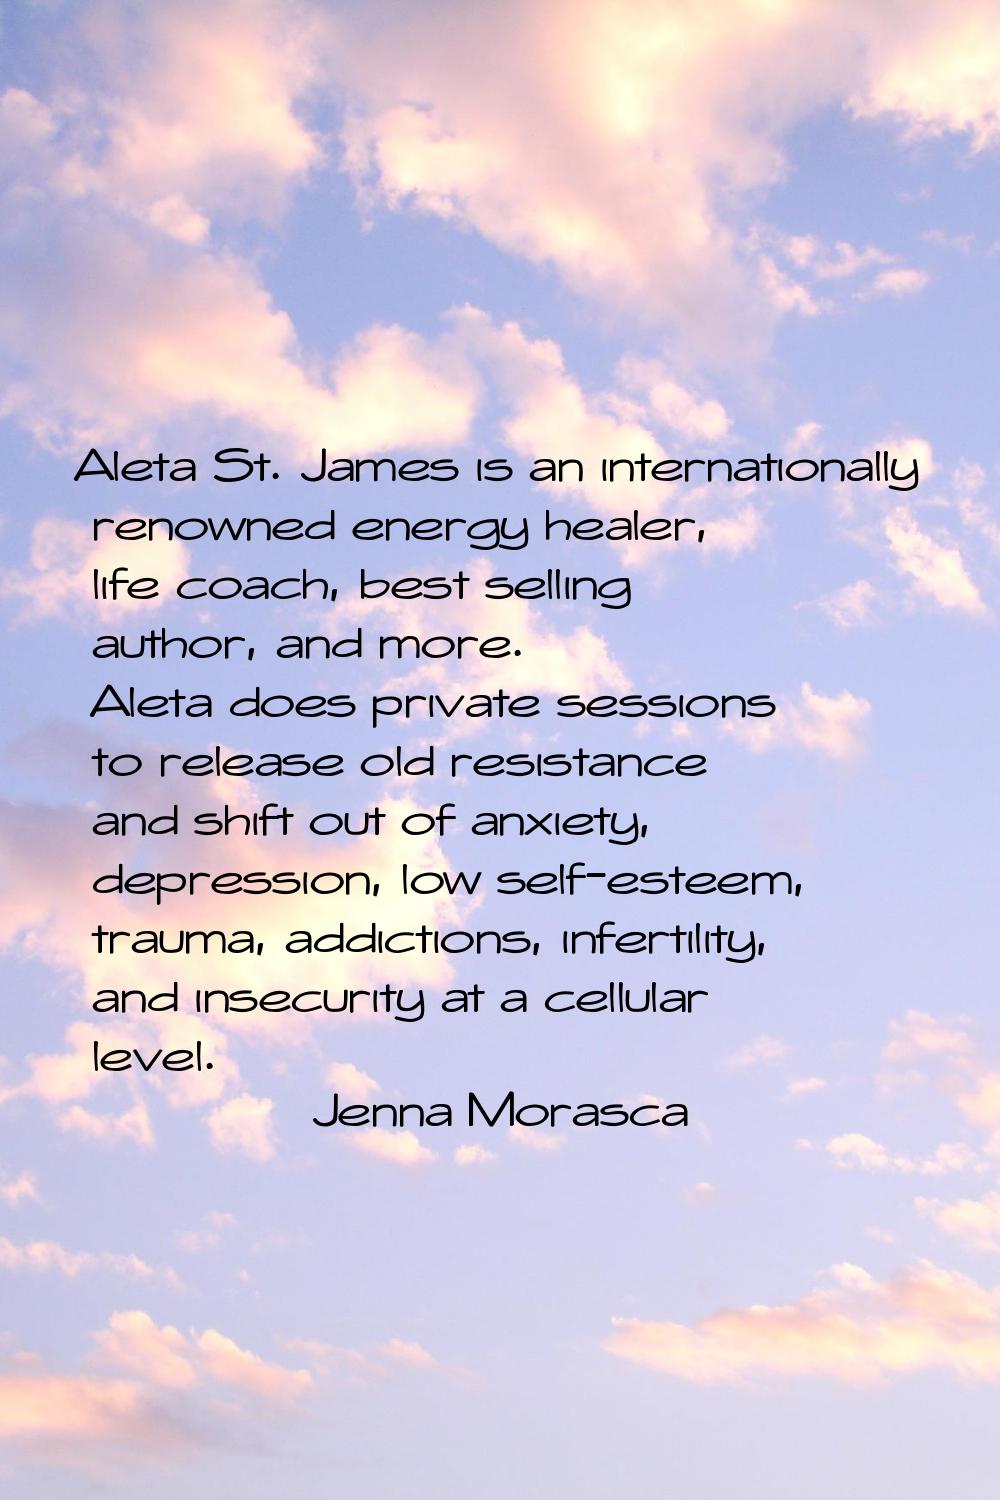 Aleta St. James is an internationally renowned energy healer, life coach, best selling author, and 